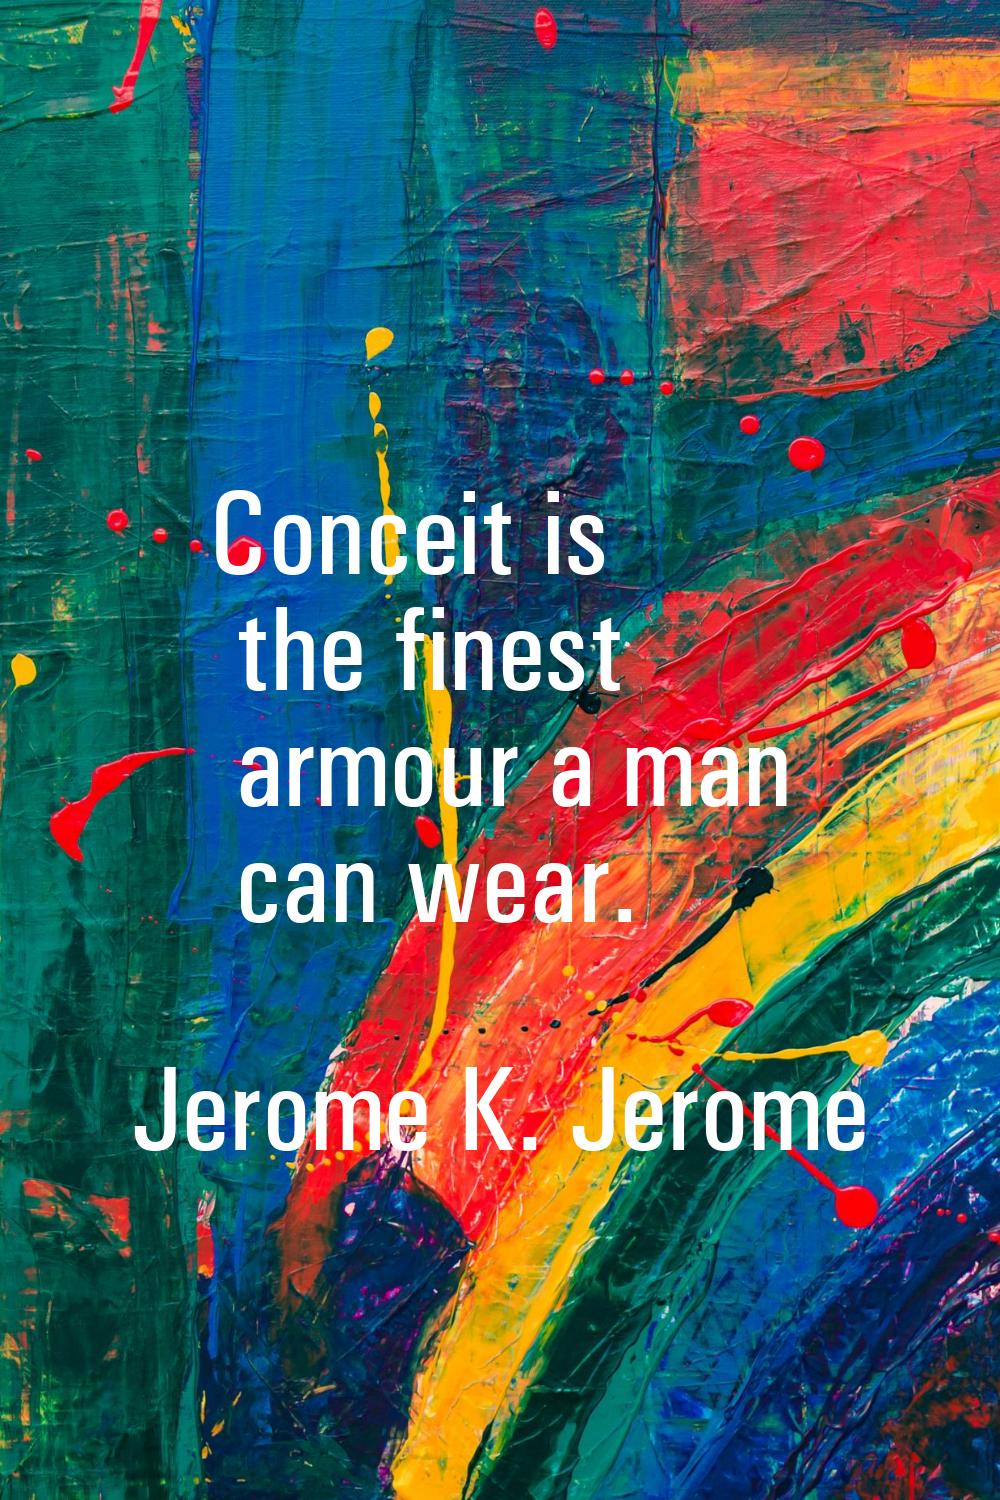 Conceit is the finest armour a man can wear.